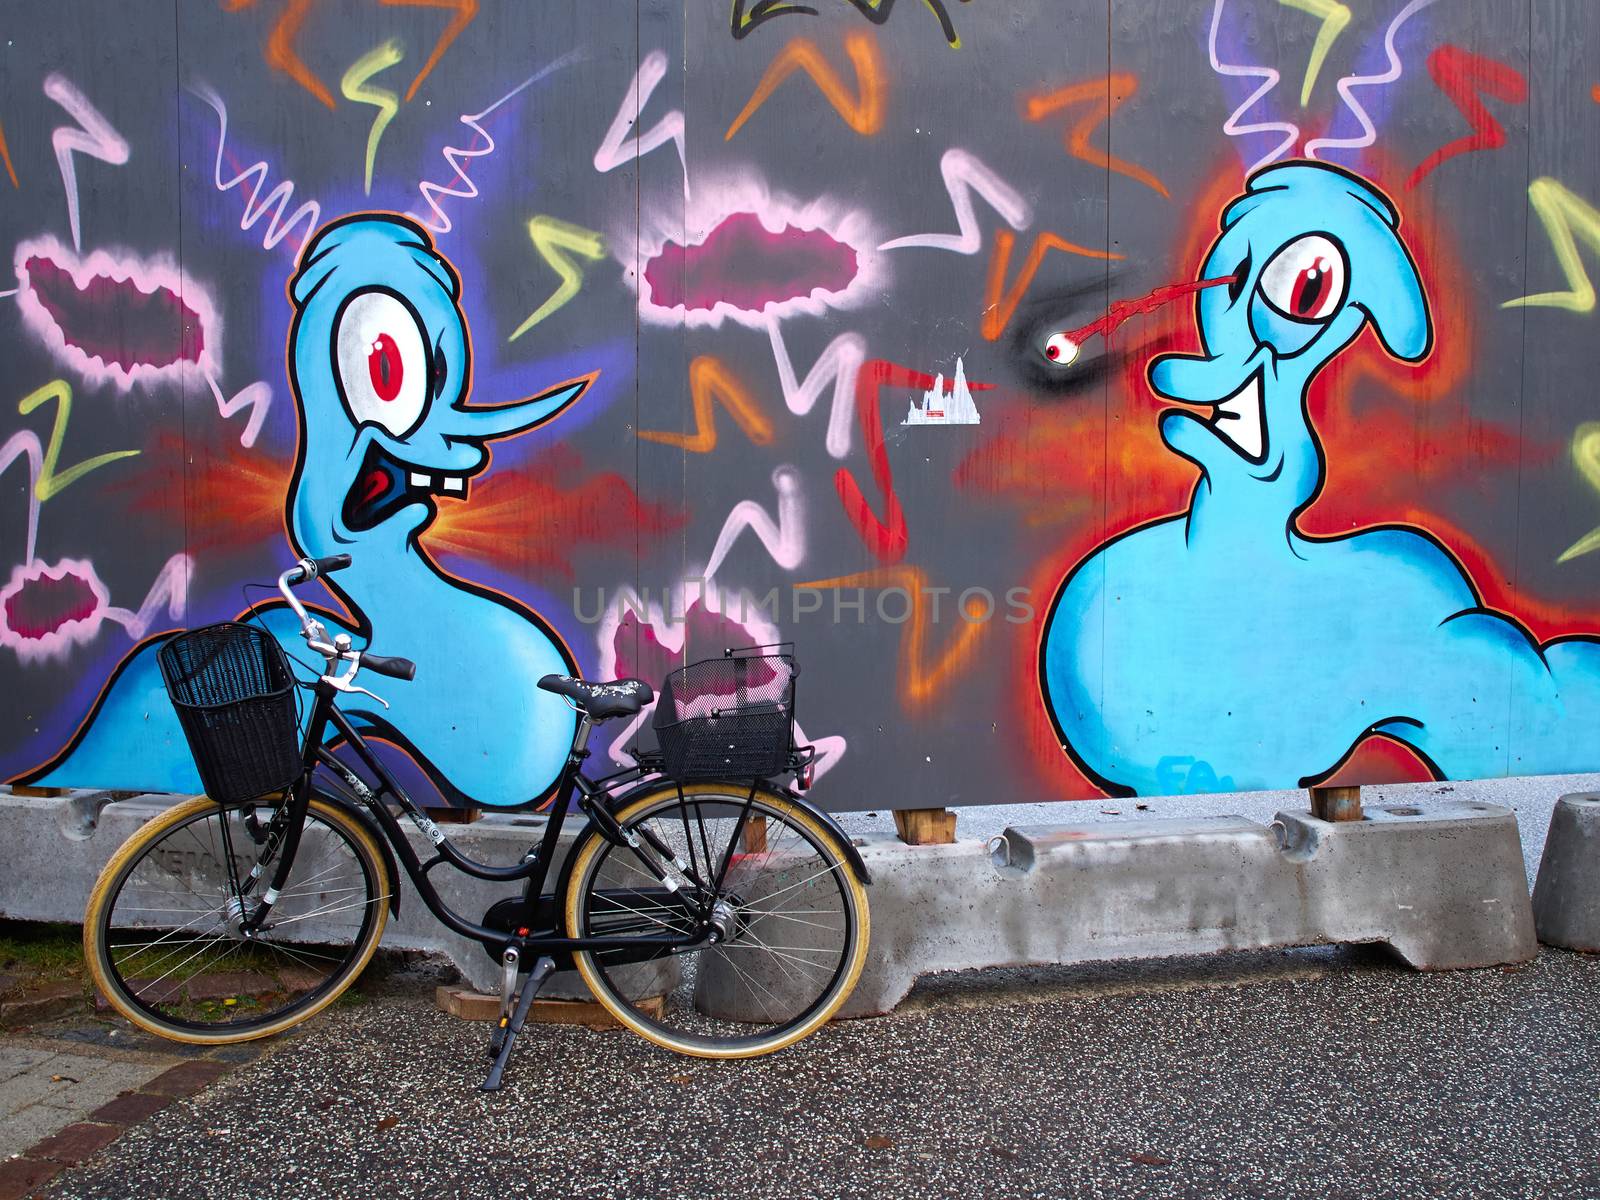 Urban scene classical bicycle bike in front of a Graffiti wall by Ronyzmbow